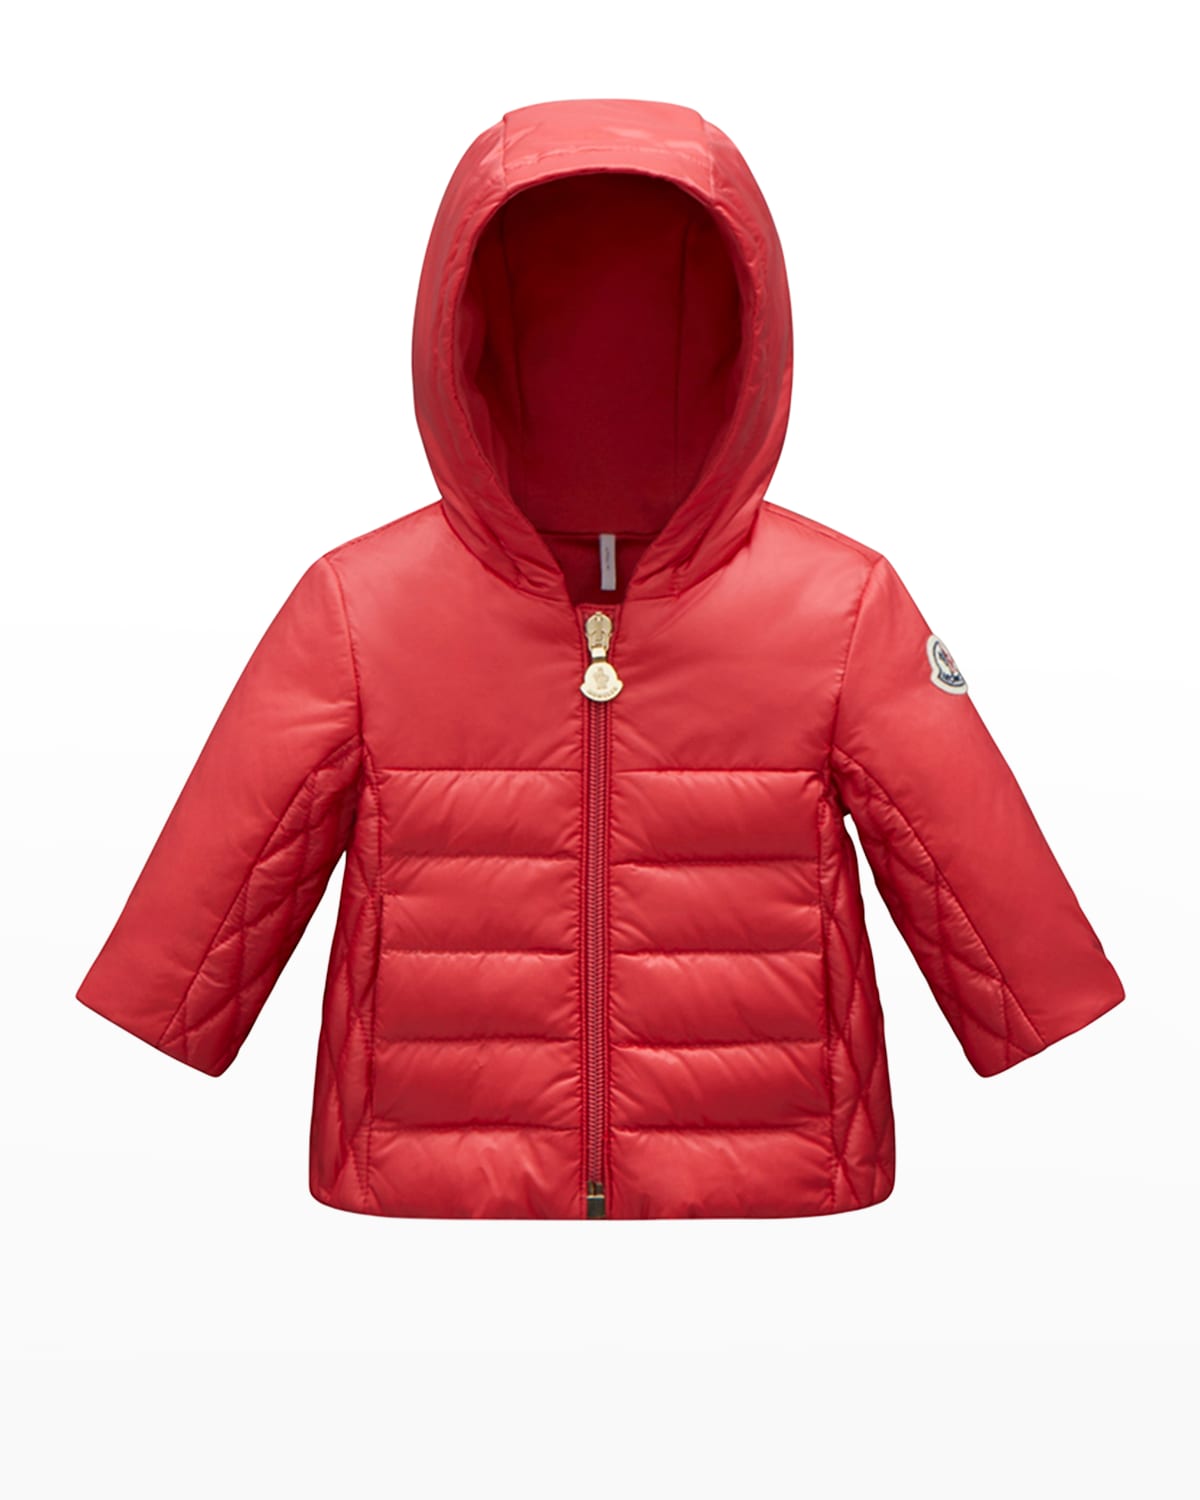 MONCLER GIRL'S ELALY QUILTED LOGO JACKET